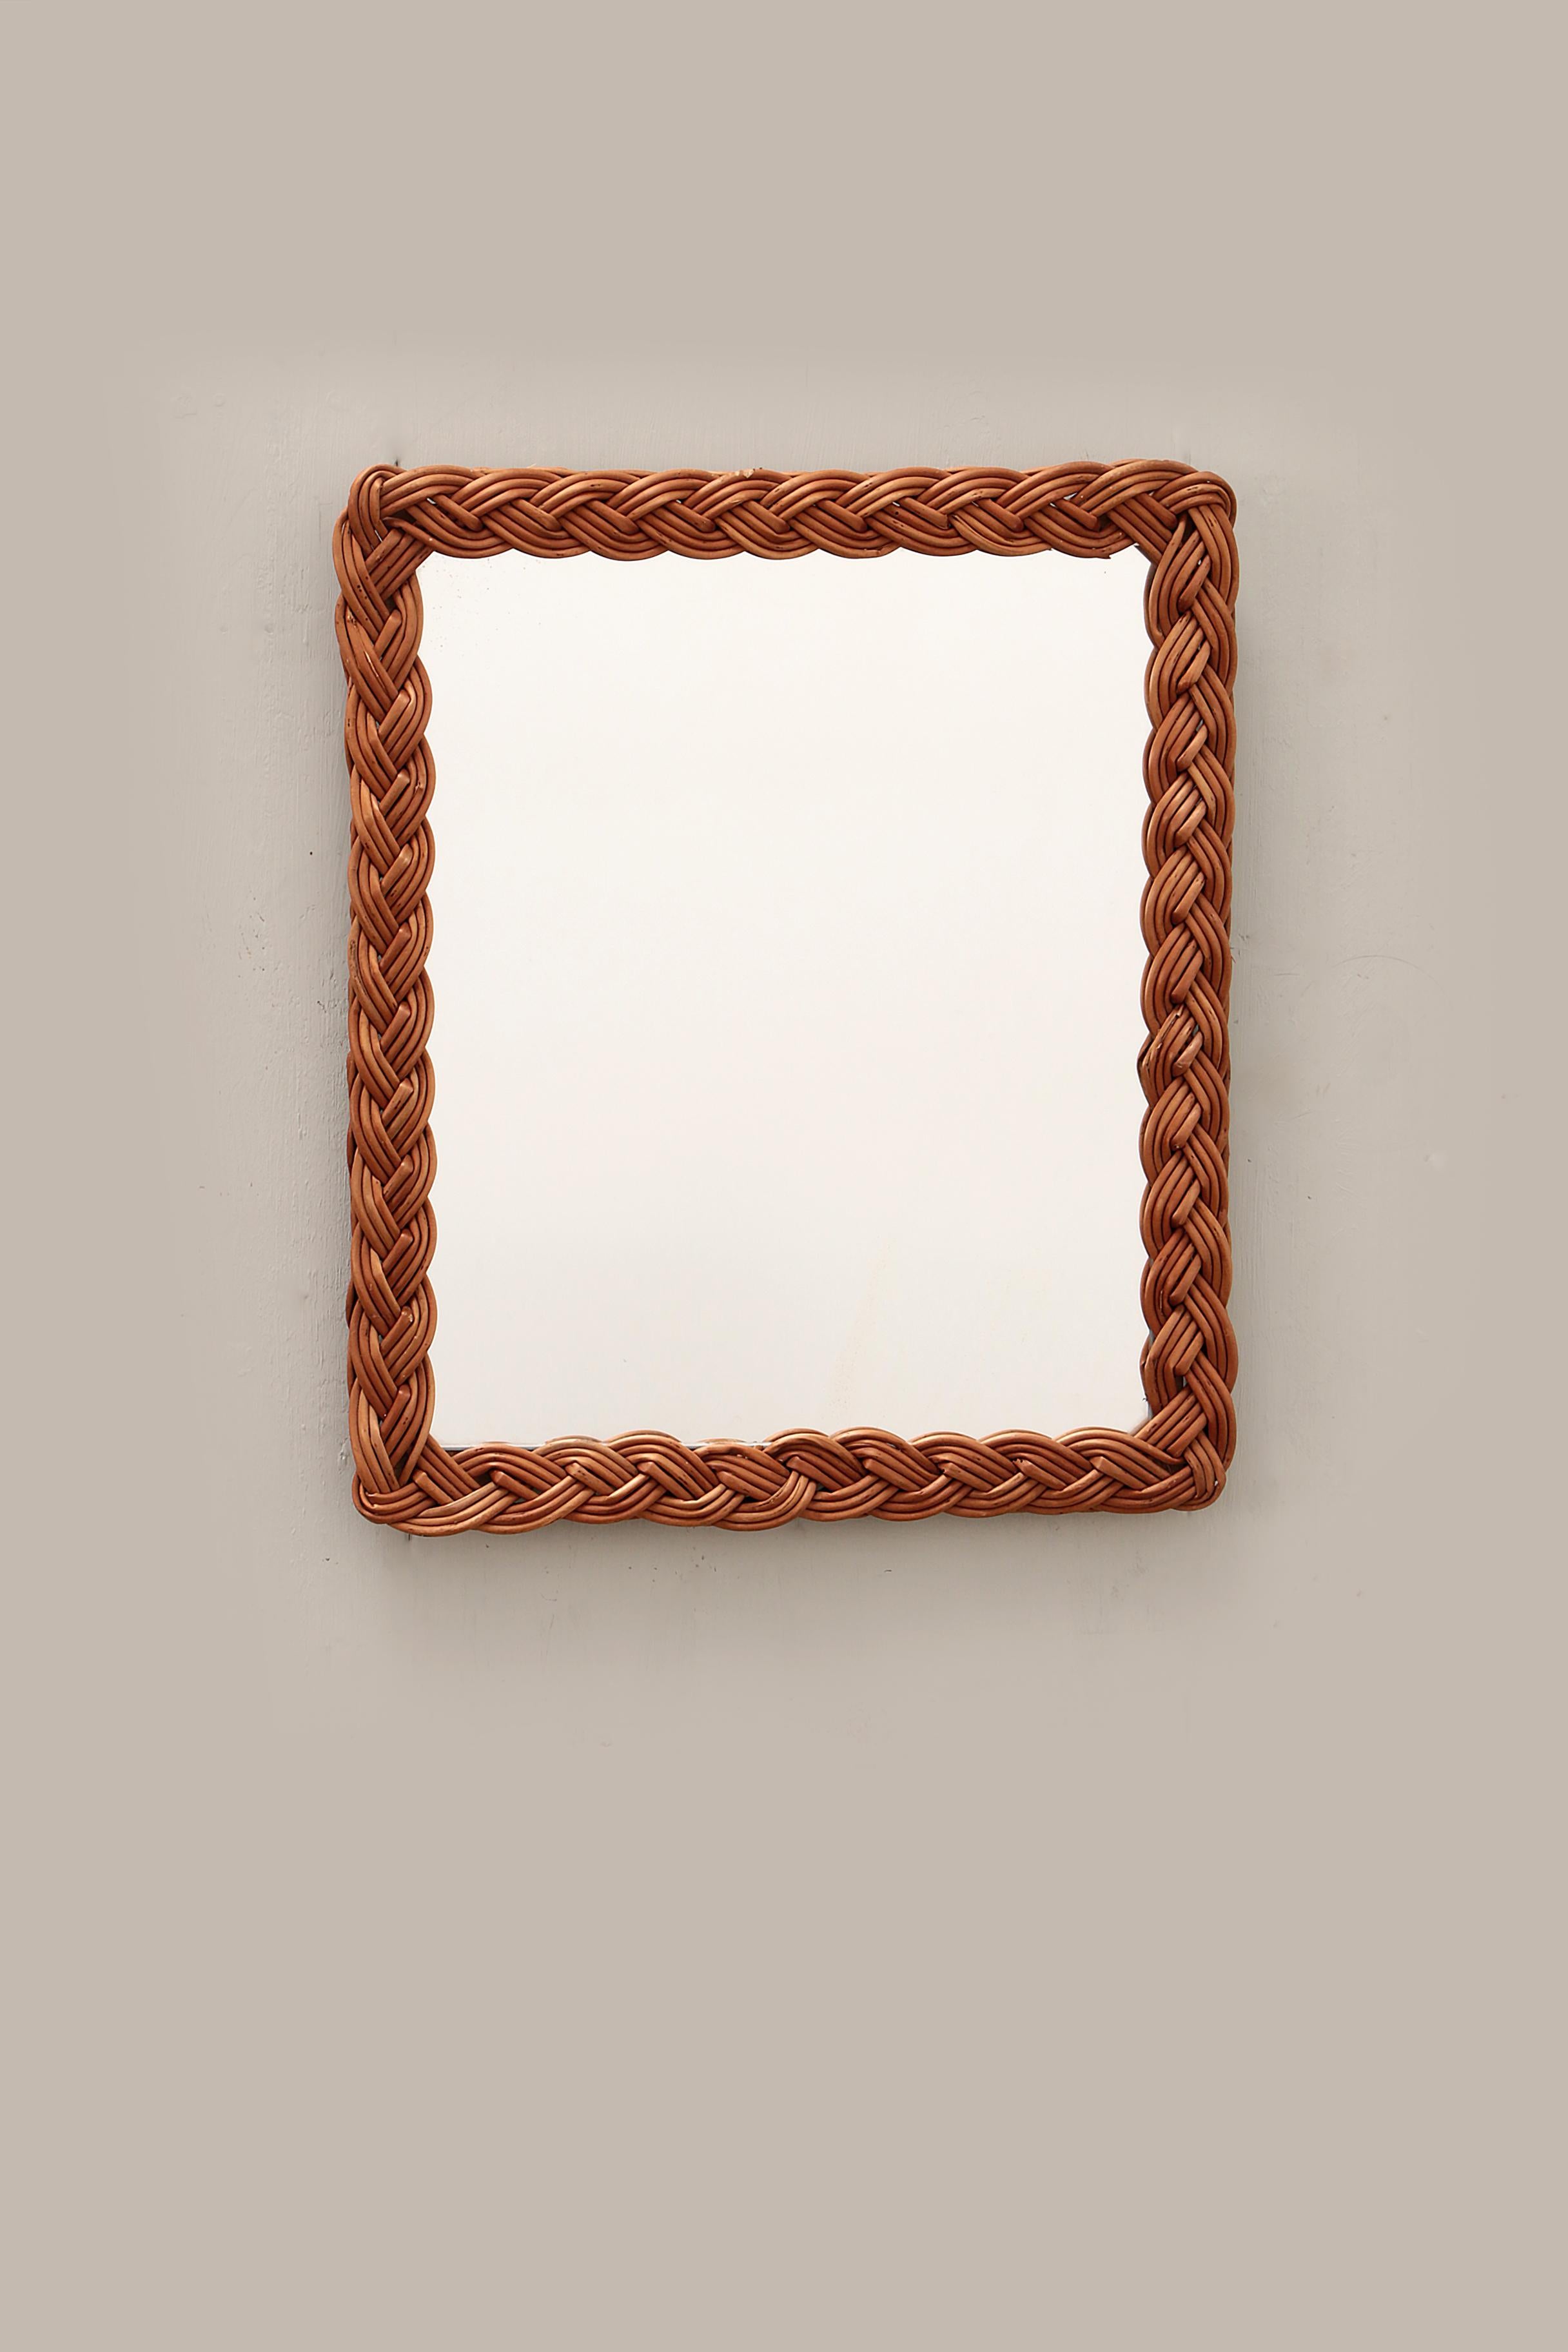 Midcentury decorative mirror with curved rattan frame.

This mirror was made around 1960 with a beautiful patina.

This beautiful item was made in France in the 1960s. The design and materials let you feel the atmosphere and breeze of the French